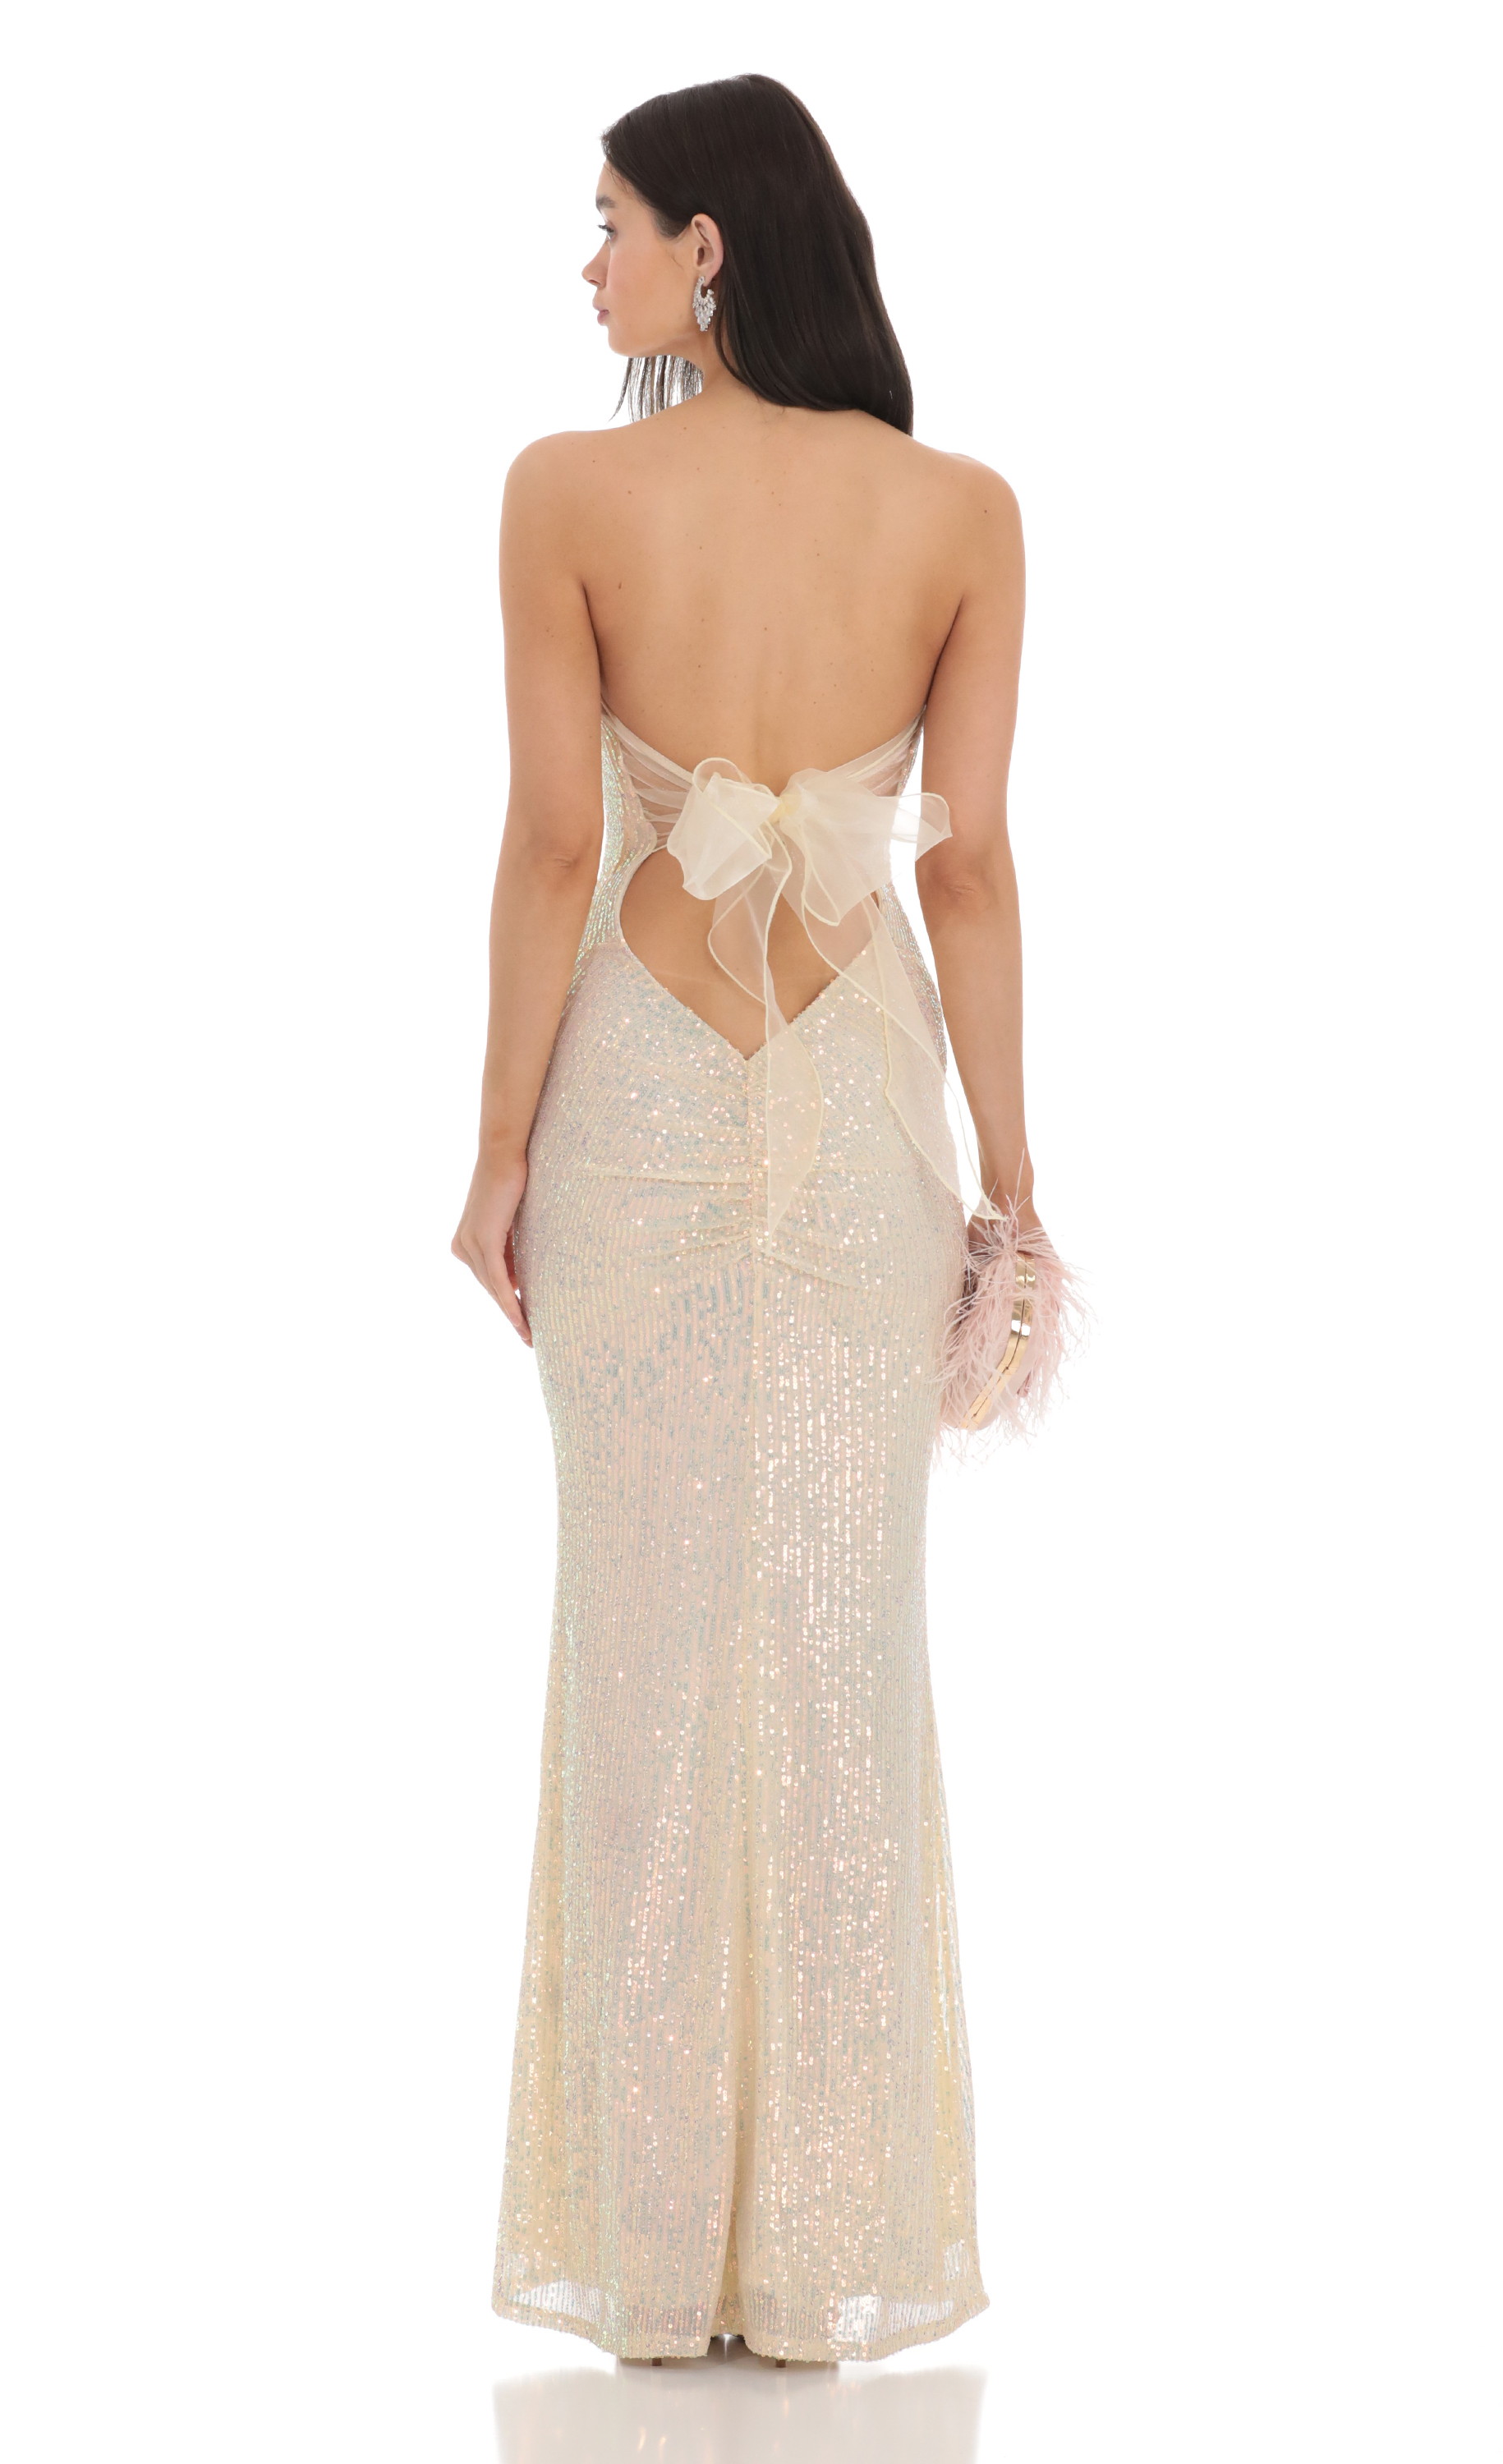 Iridescent Sequin Strapless Maxi Dress in Champagne